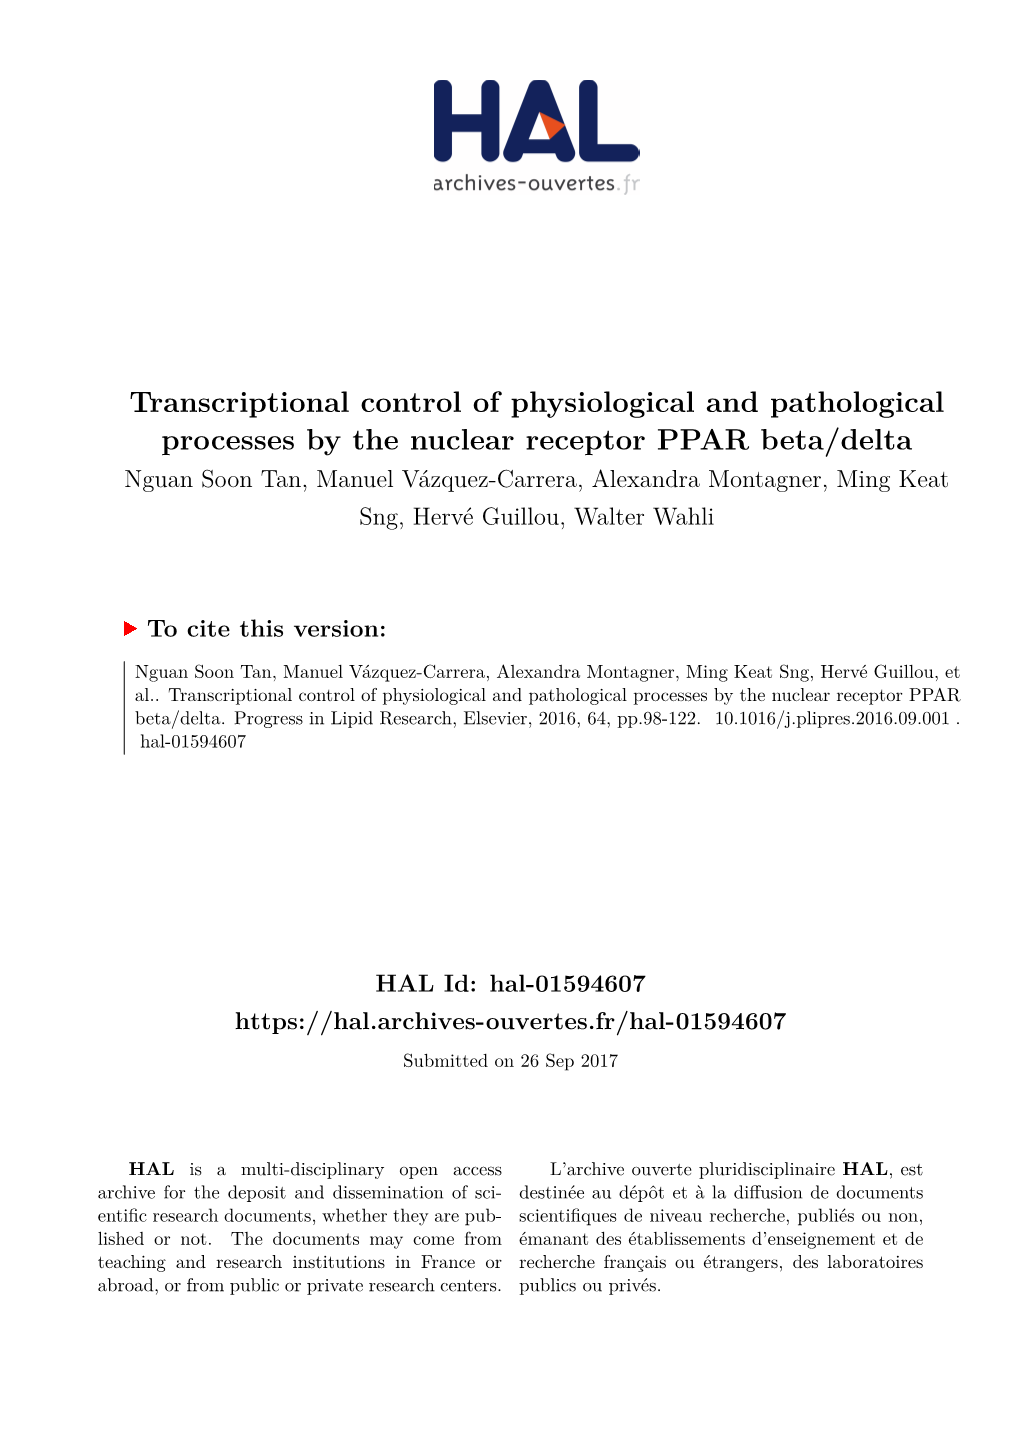 Transcriptional Control of Physiological and Pathological Processes by The